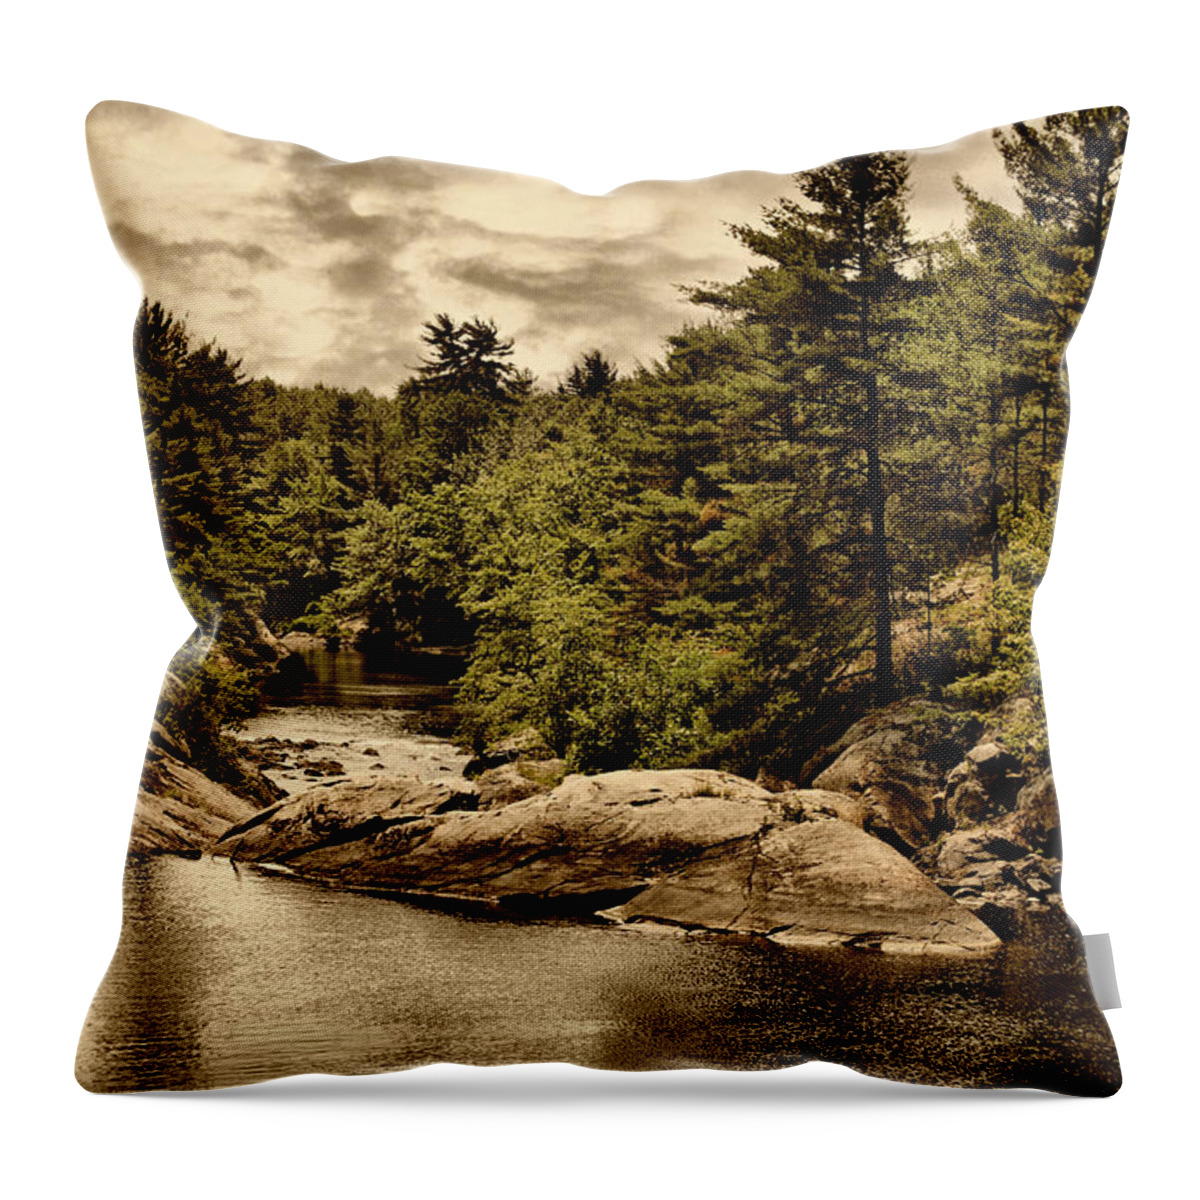 River Throw Pillow featuring the digital art Solitary Wilderness by JGracey Stinson